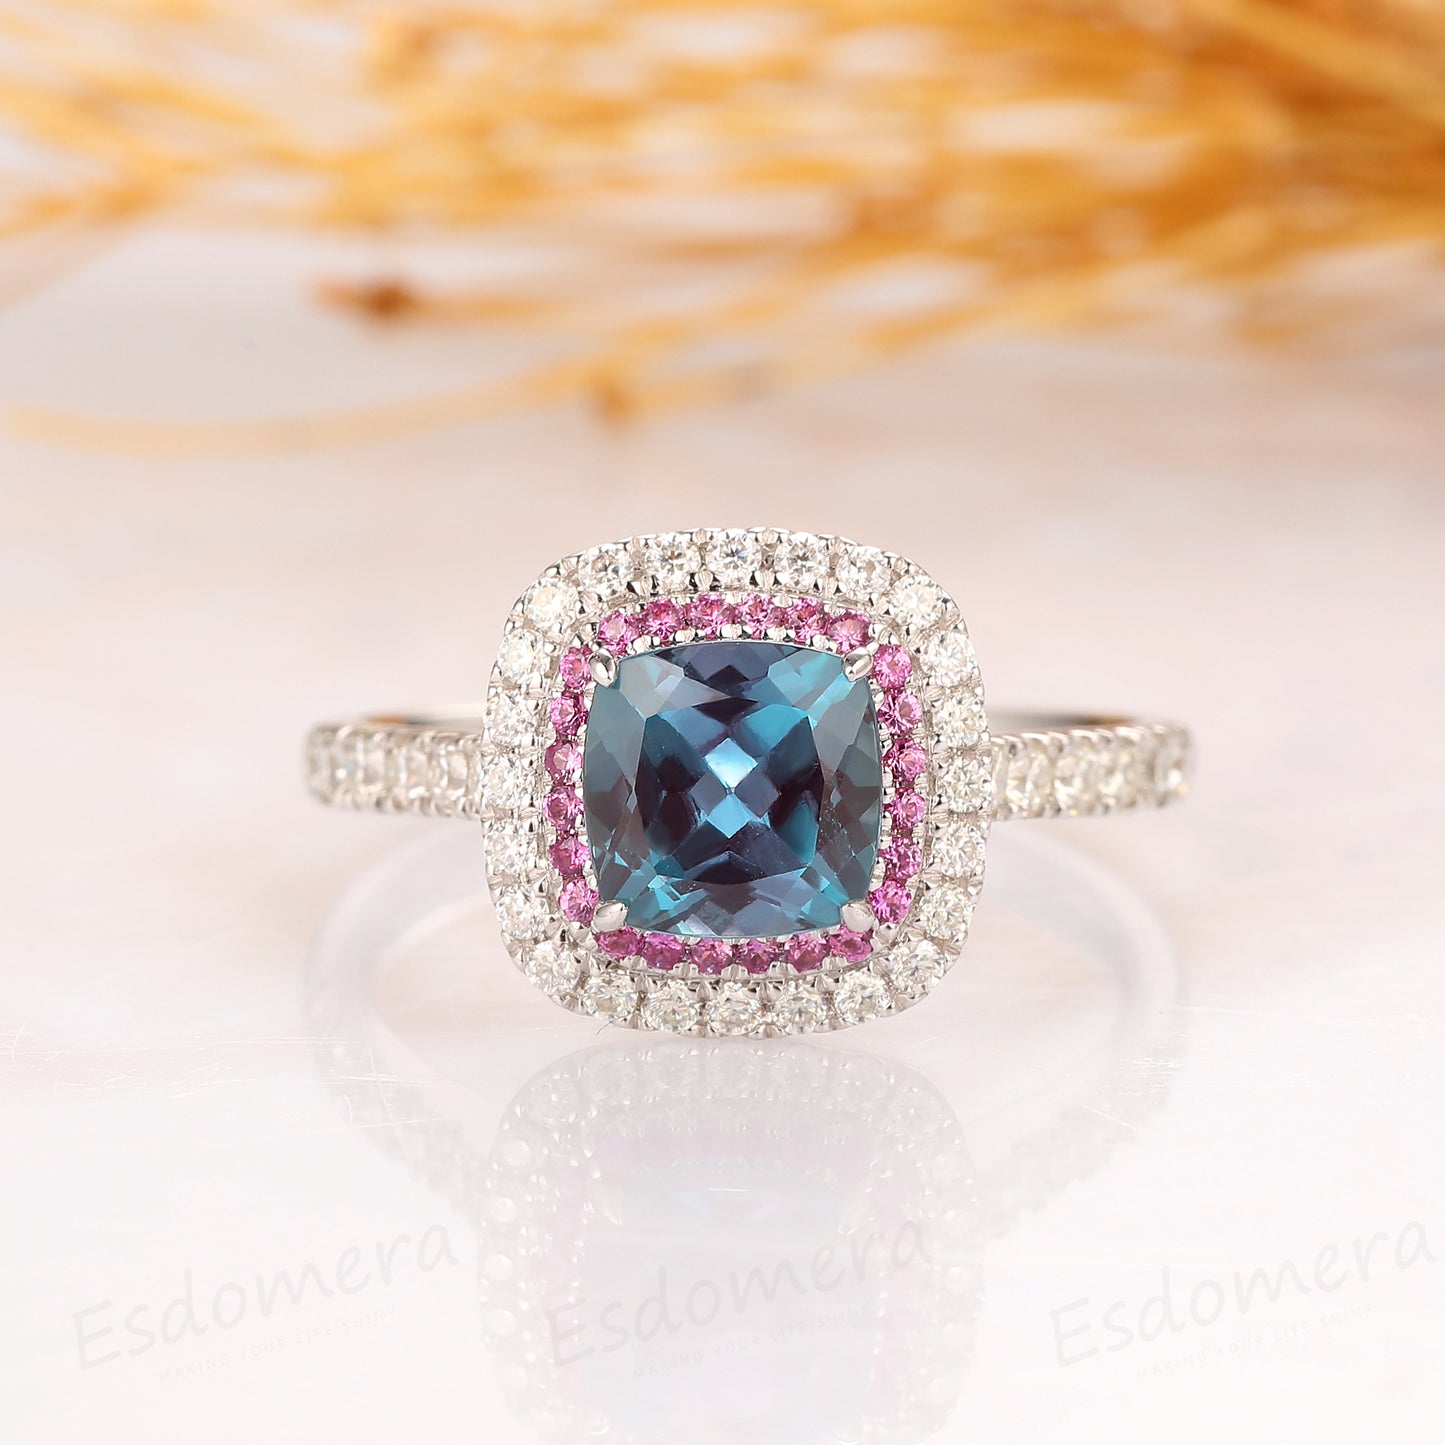 Cushion Cut 1.5ct Alexandrite Ring, Double Halo Pink Pave Set Accents Ring, 14k White Gold Engagement Ring